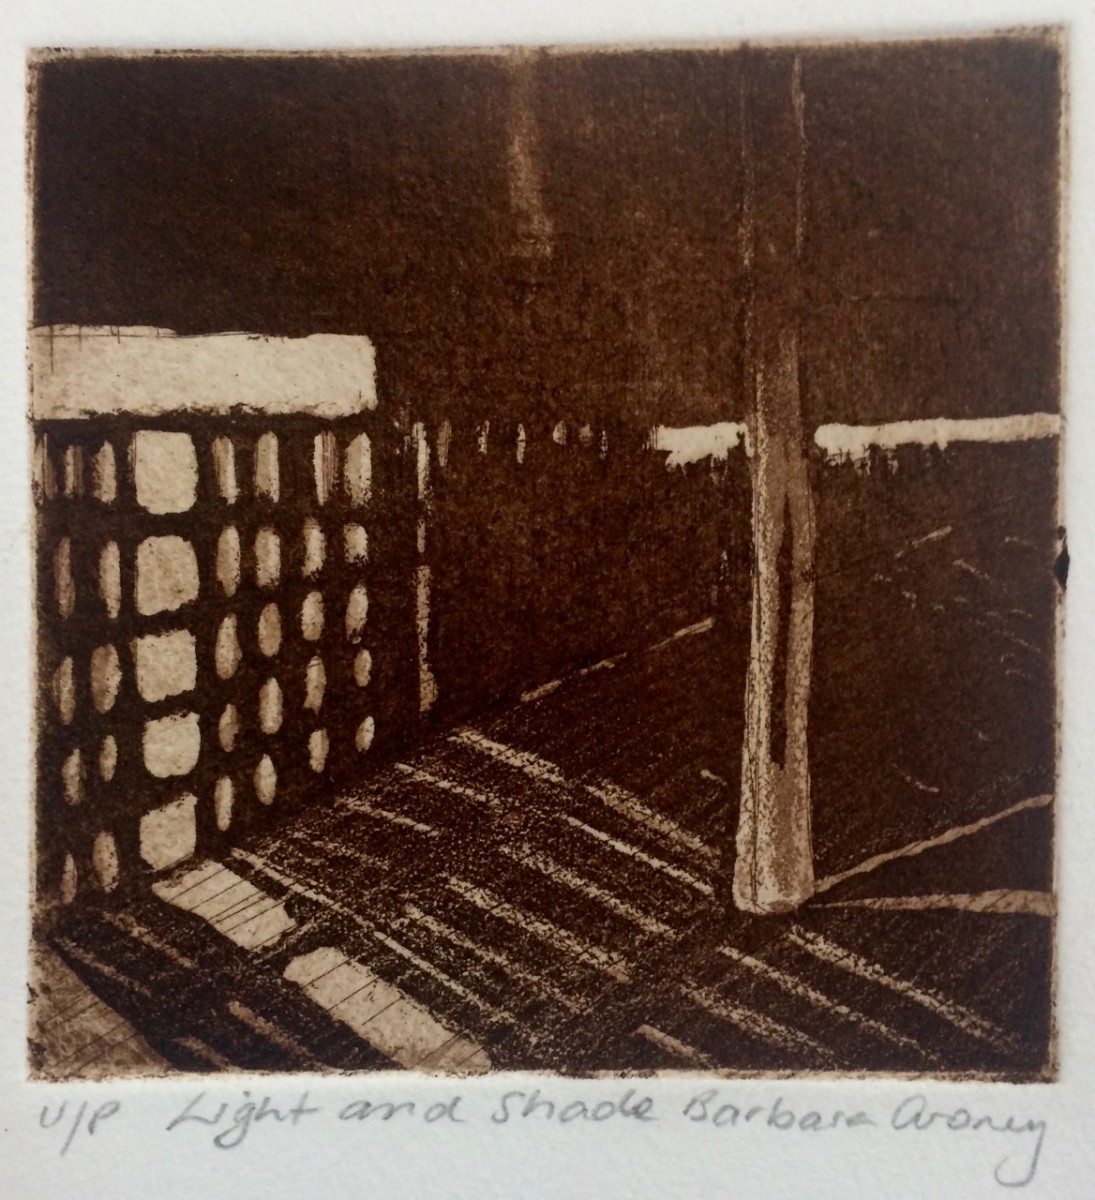 Light and Shade 1/3 by Barbara Aroney  Image: Light and Shade, etching, 10x10cm sepia